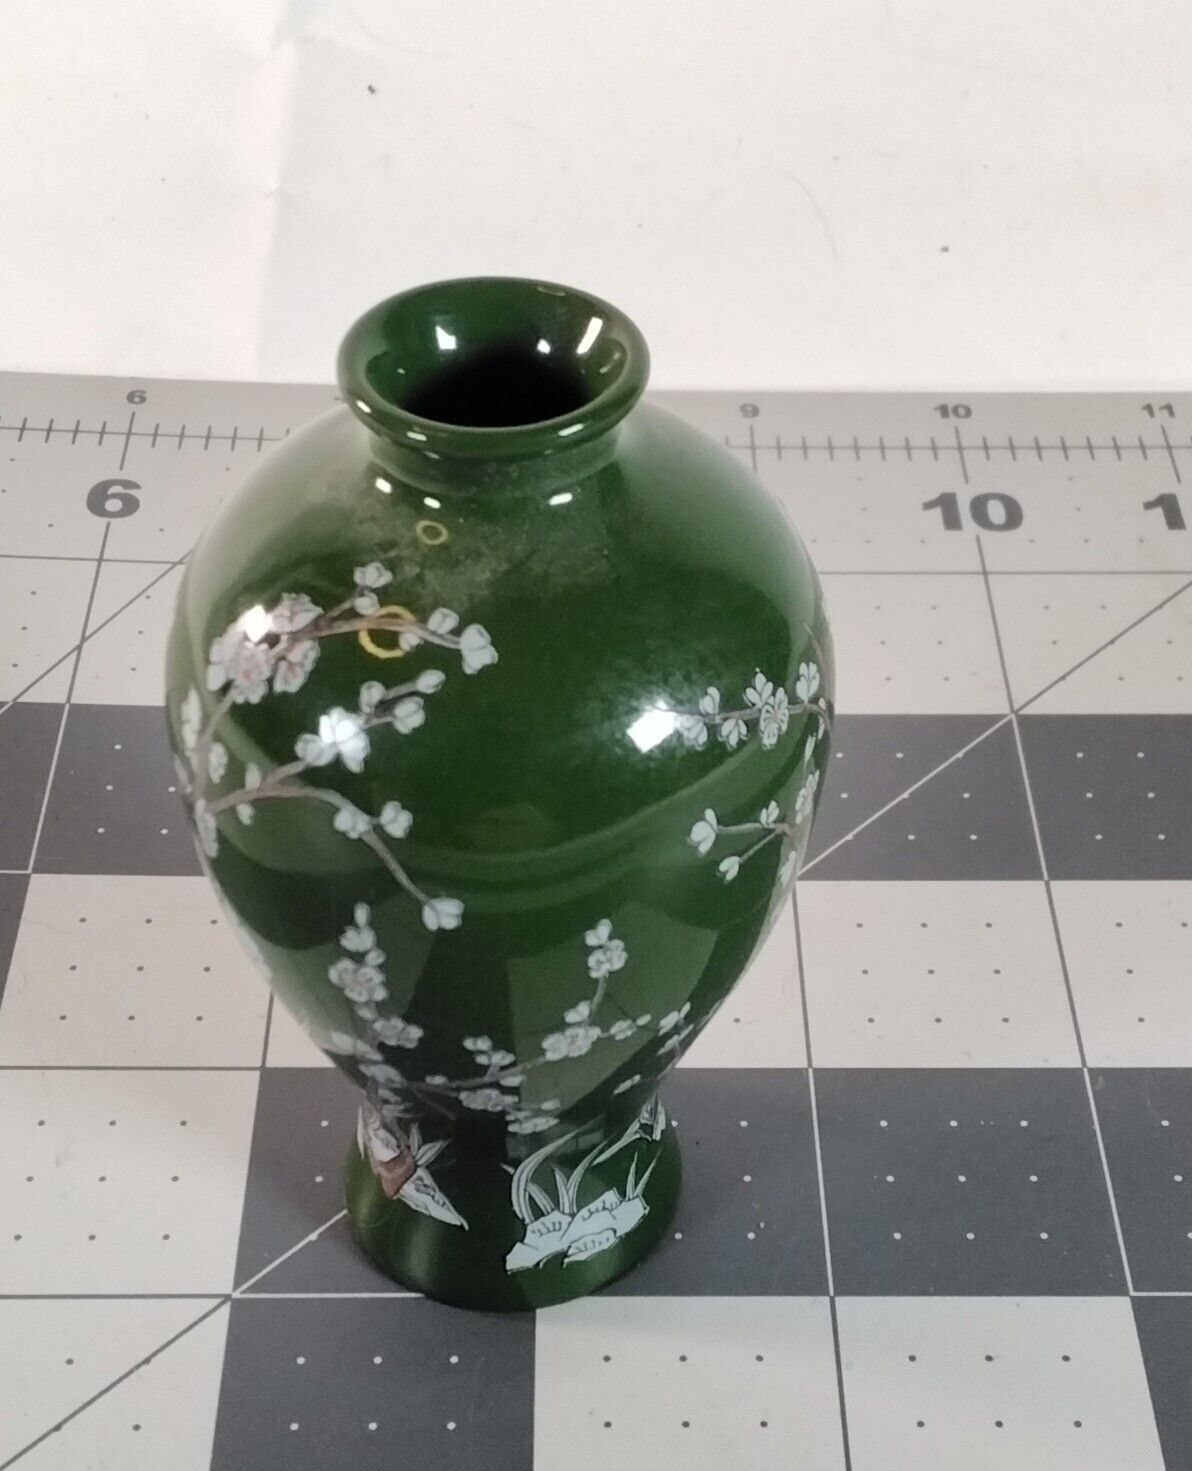 Franklin Mint Porcelain Treasures Of The Imperial Dynasties Green Miniature Vase